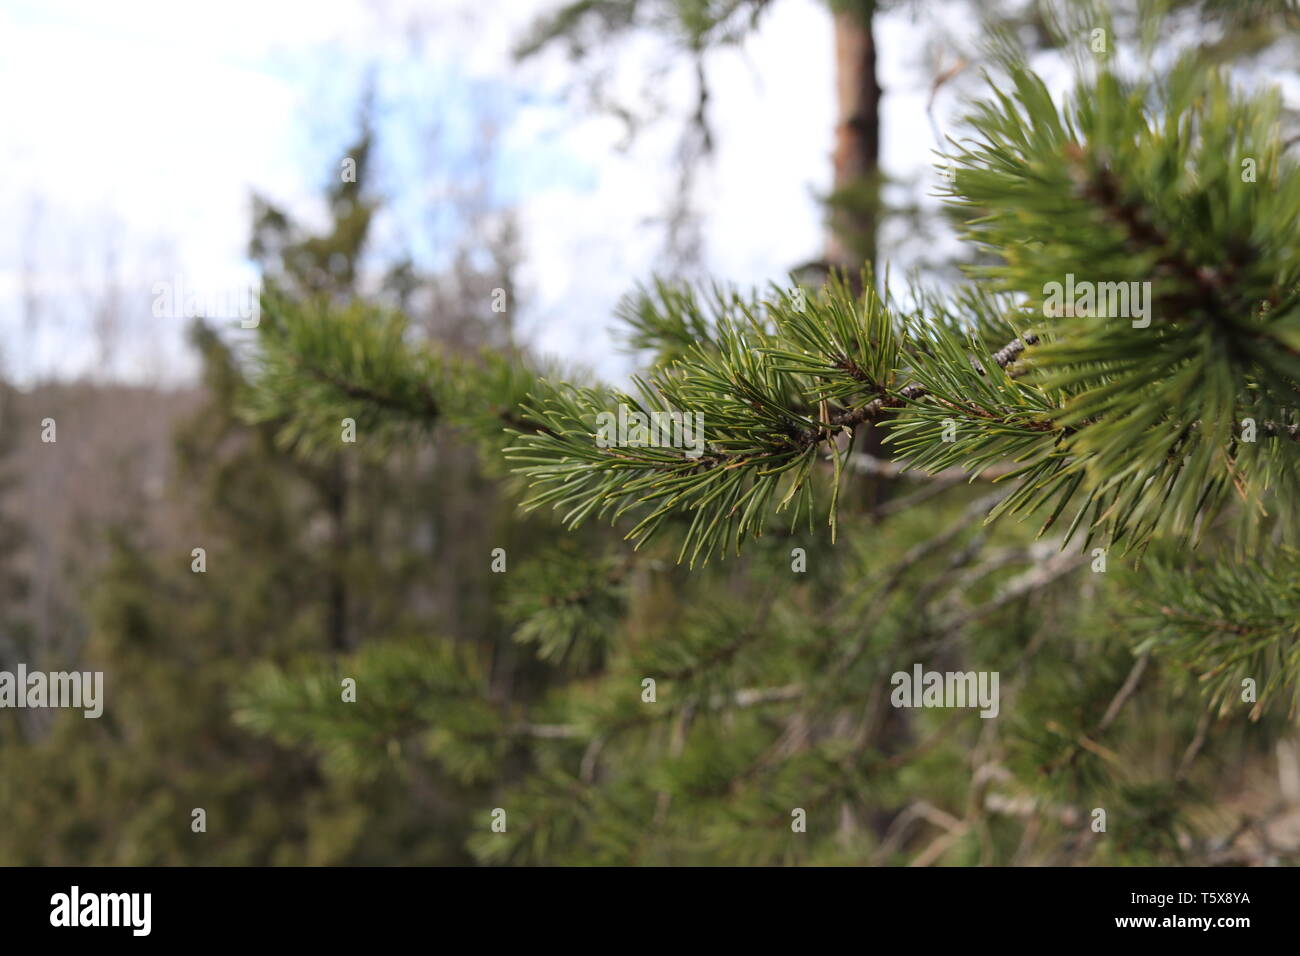 A close-up of a pine branch with a pine and spruce forest and a blue sky background. Stock Photo